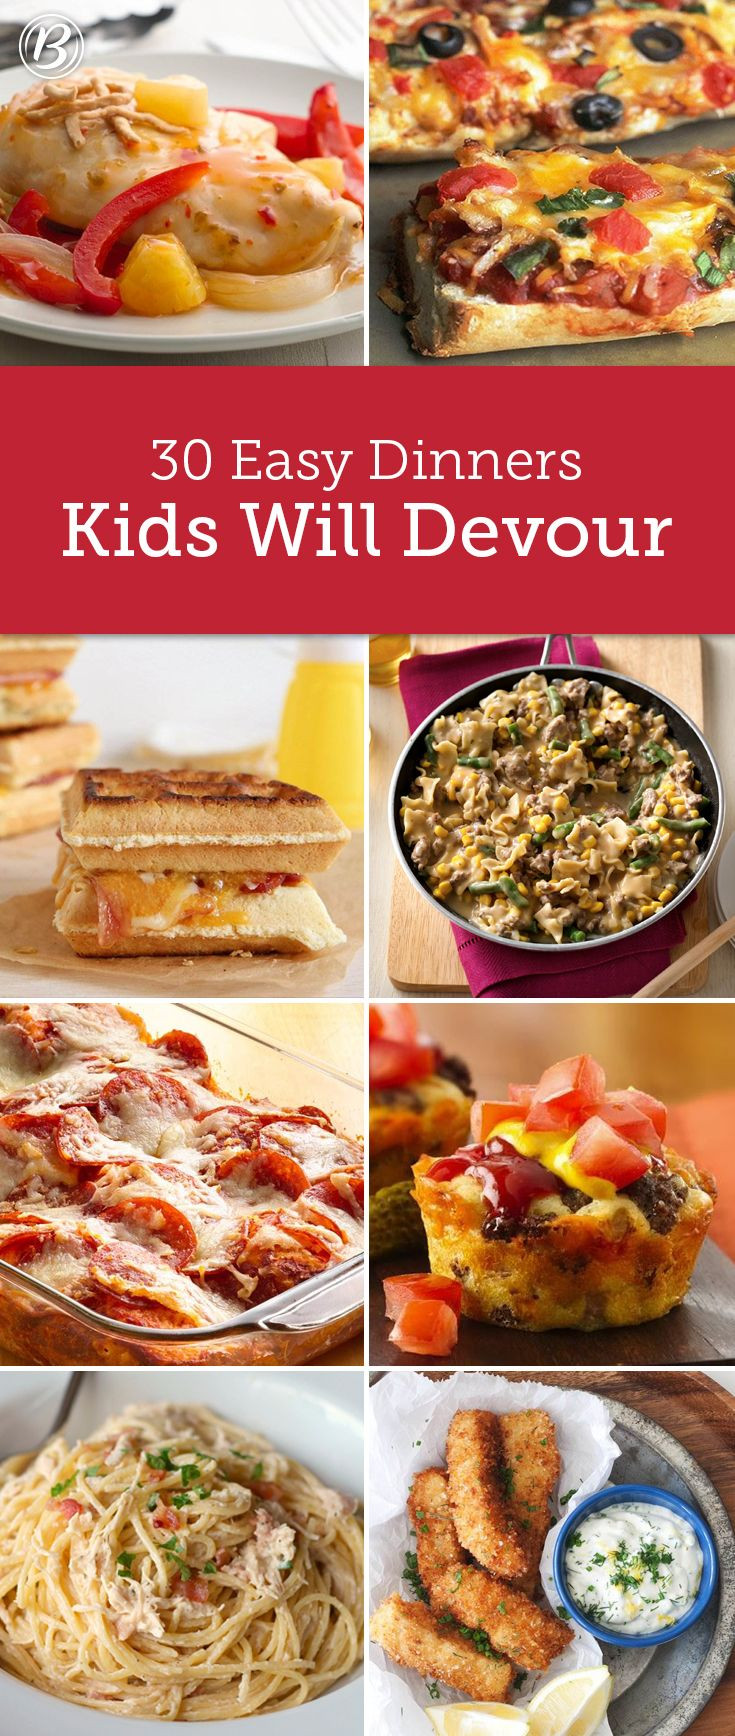 Easy Healthy Kid Friendly Dinners
 Kids’ Most Requested Dinners